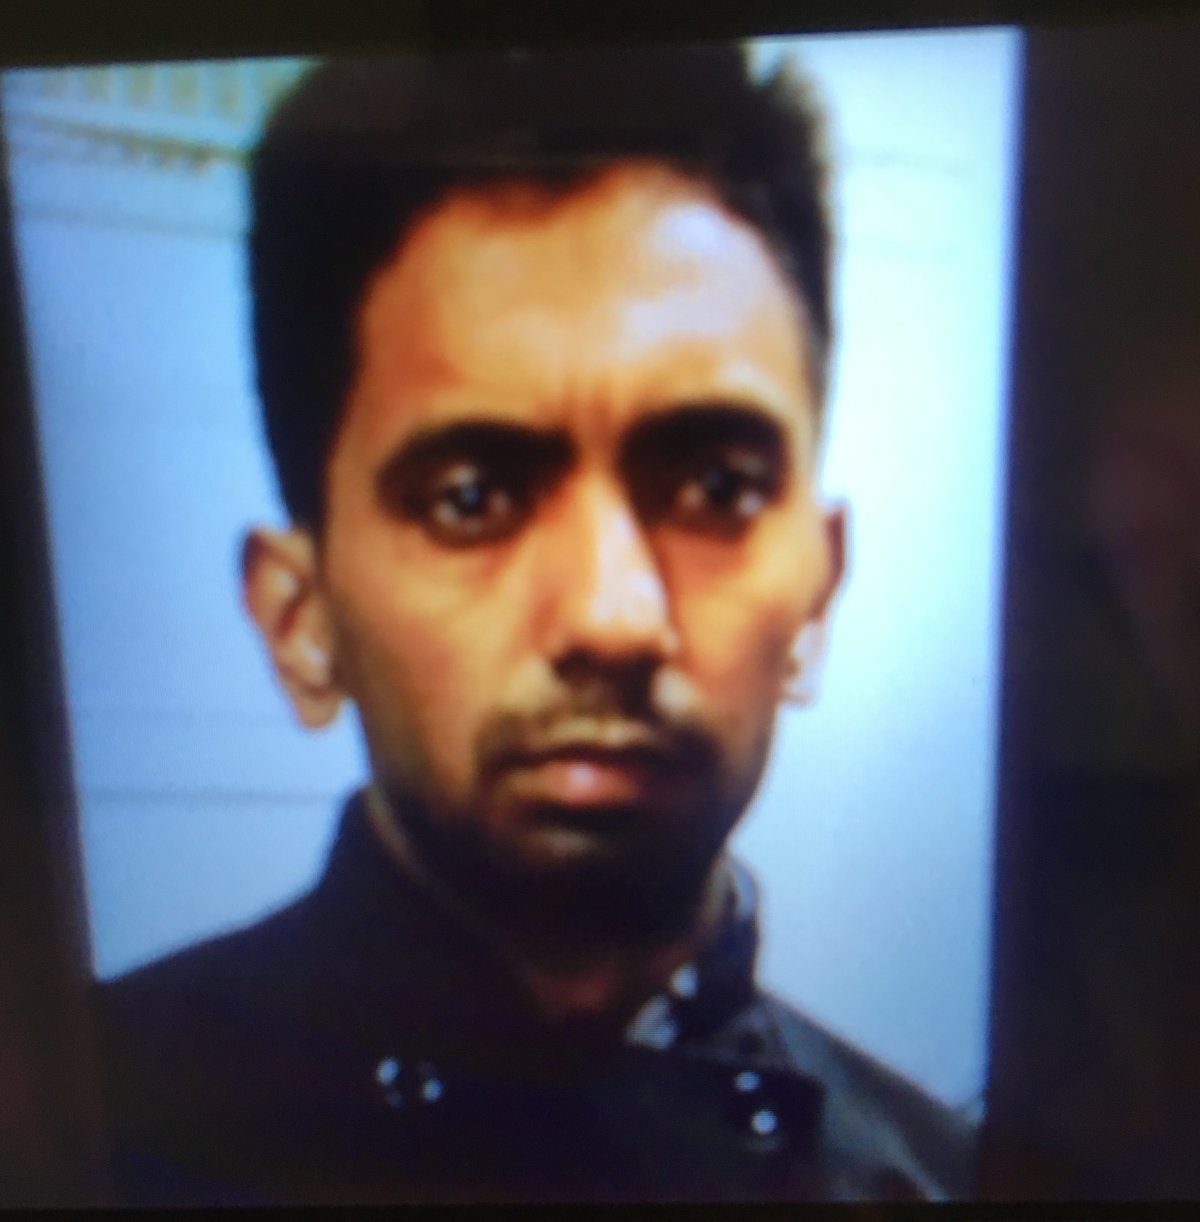 Surrey RCMP searching for missing man - image